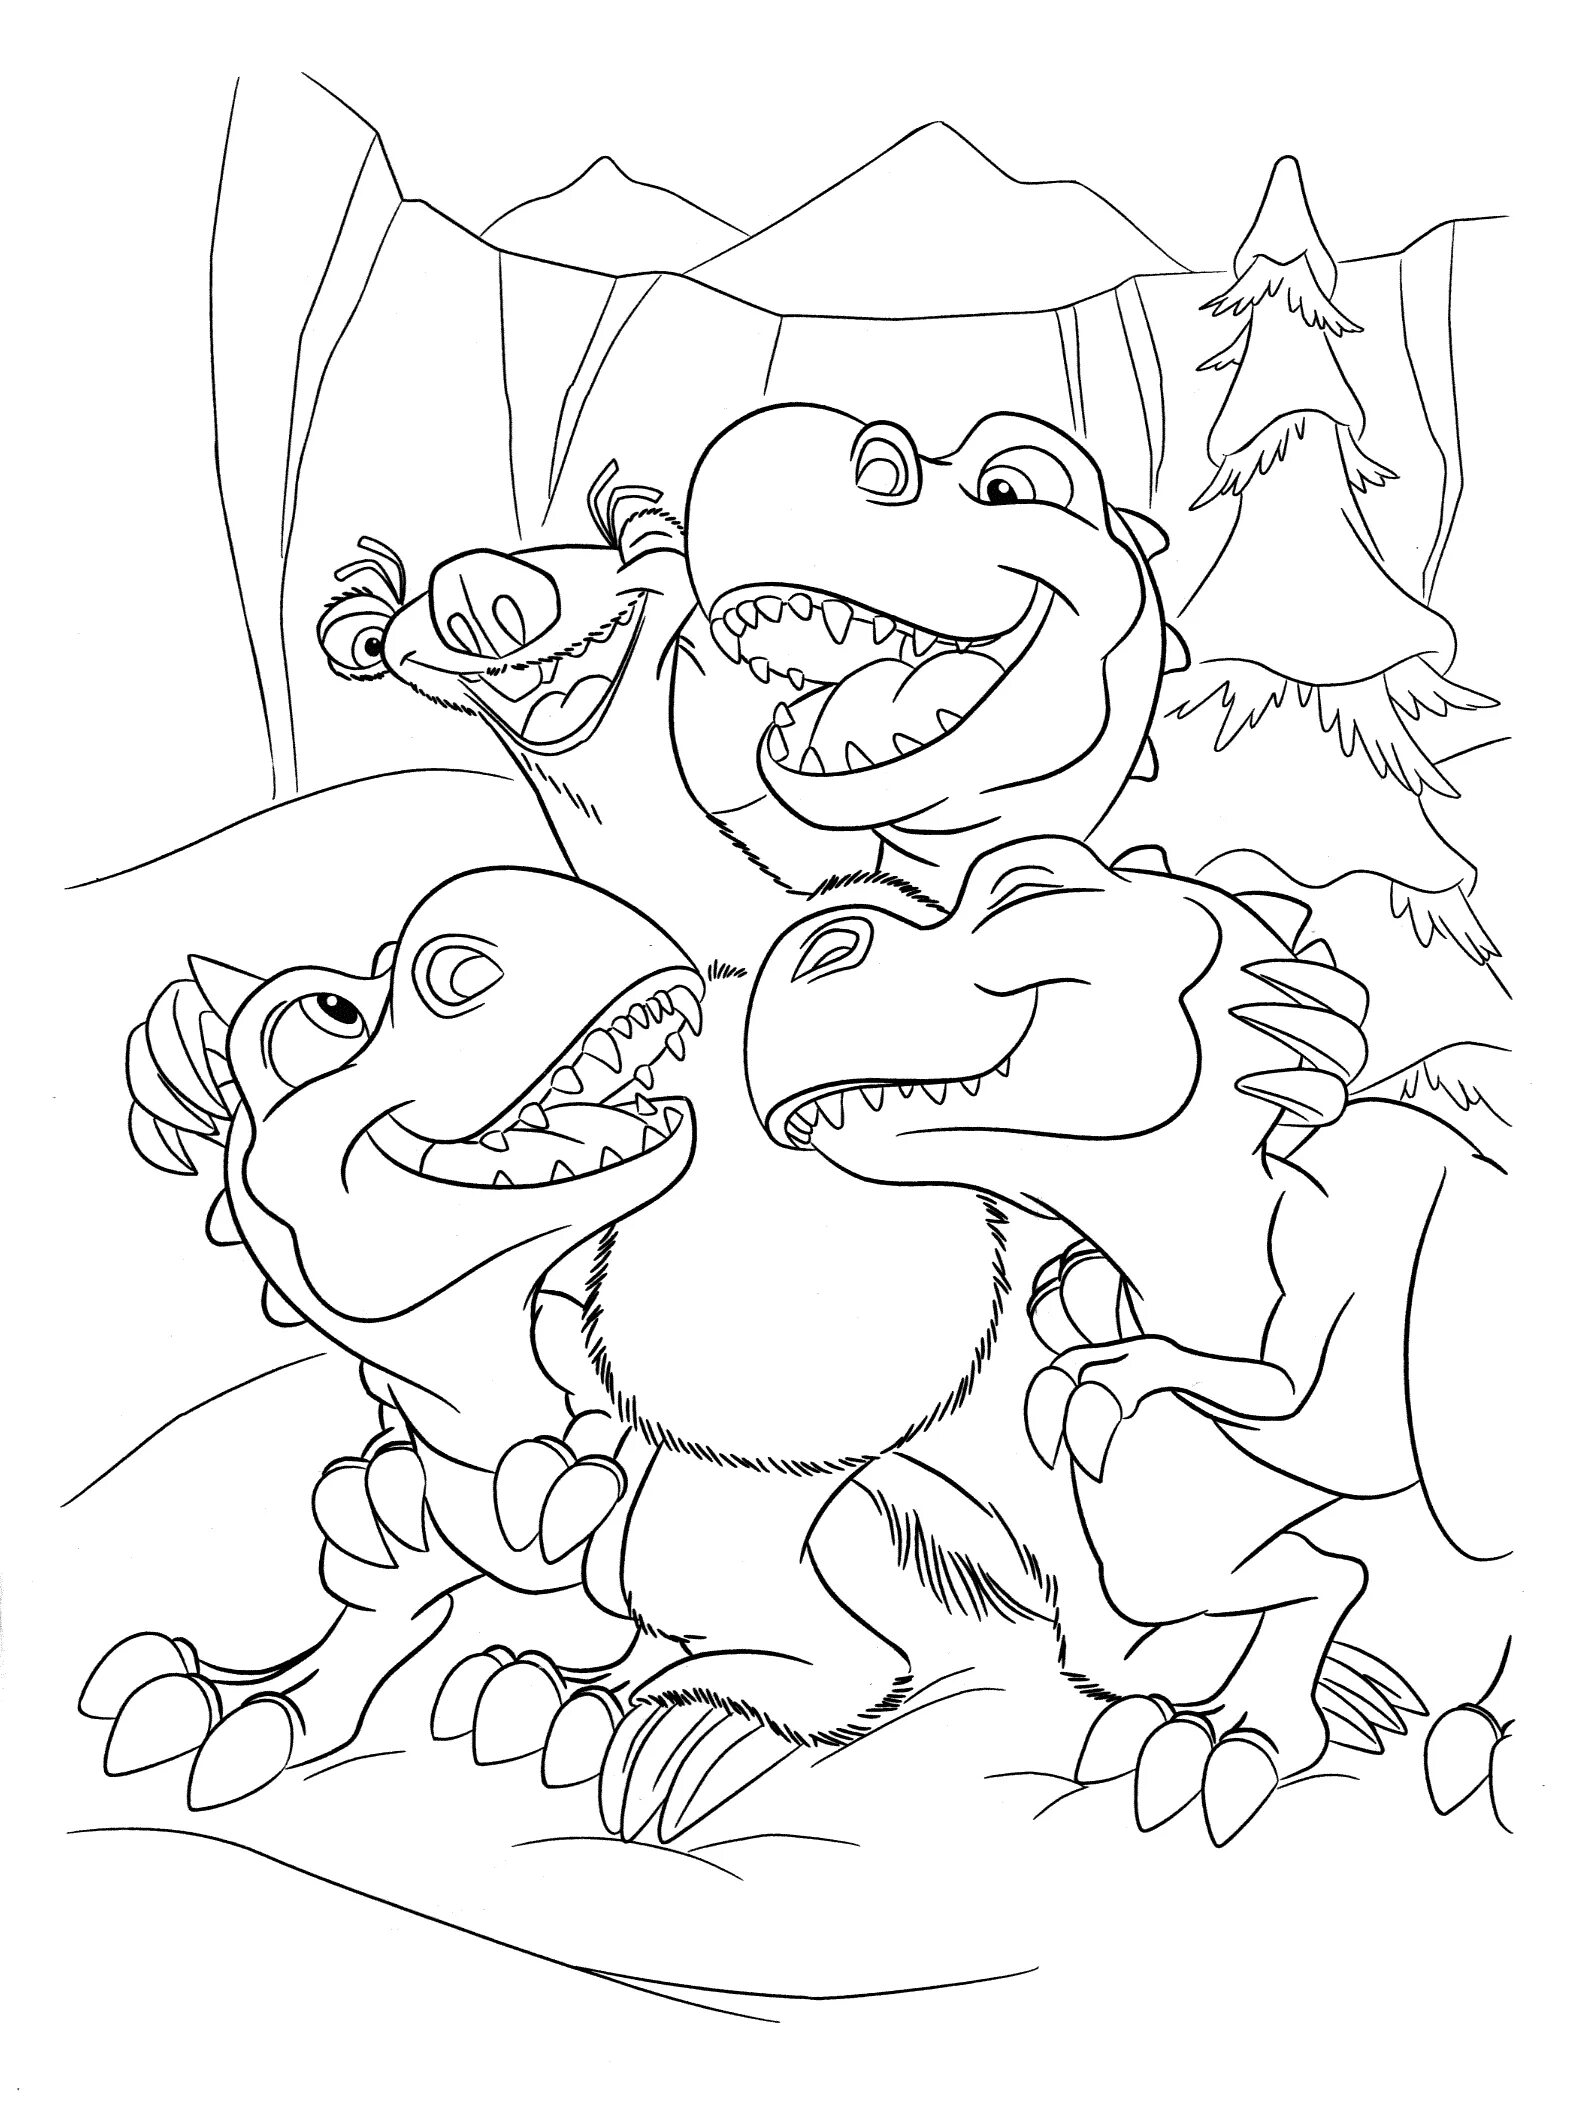 Majestic ice age 3 coloring page